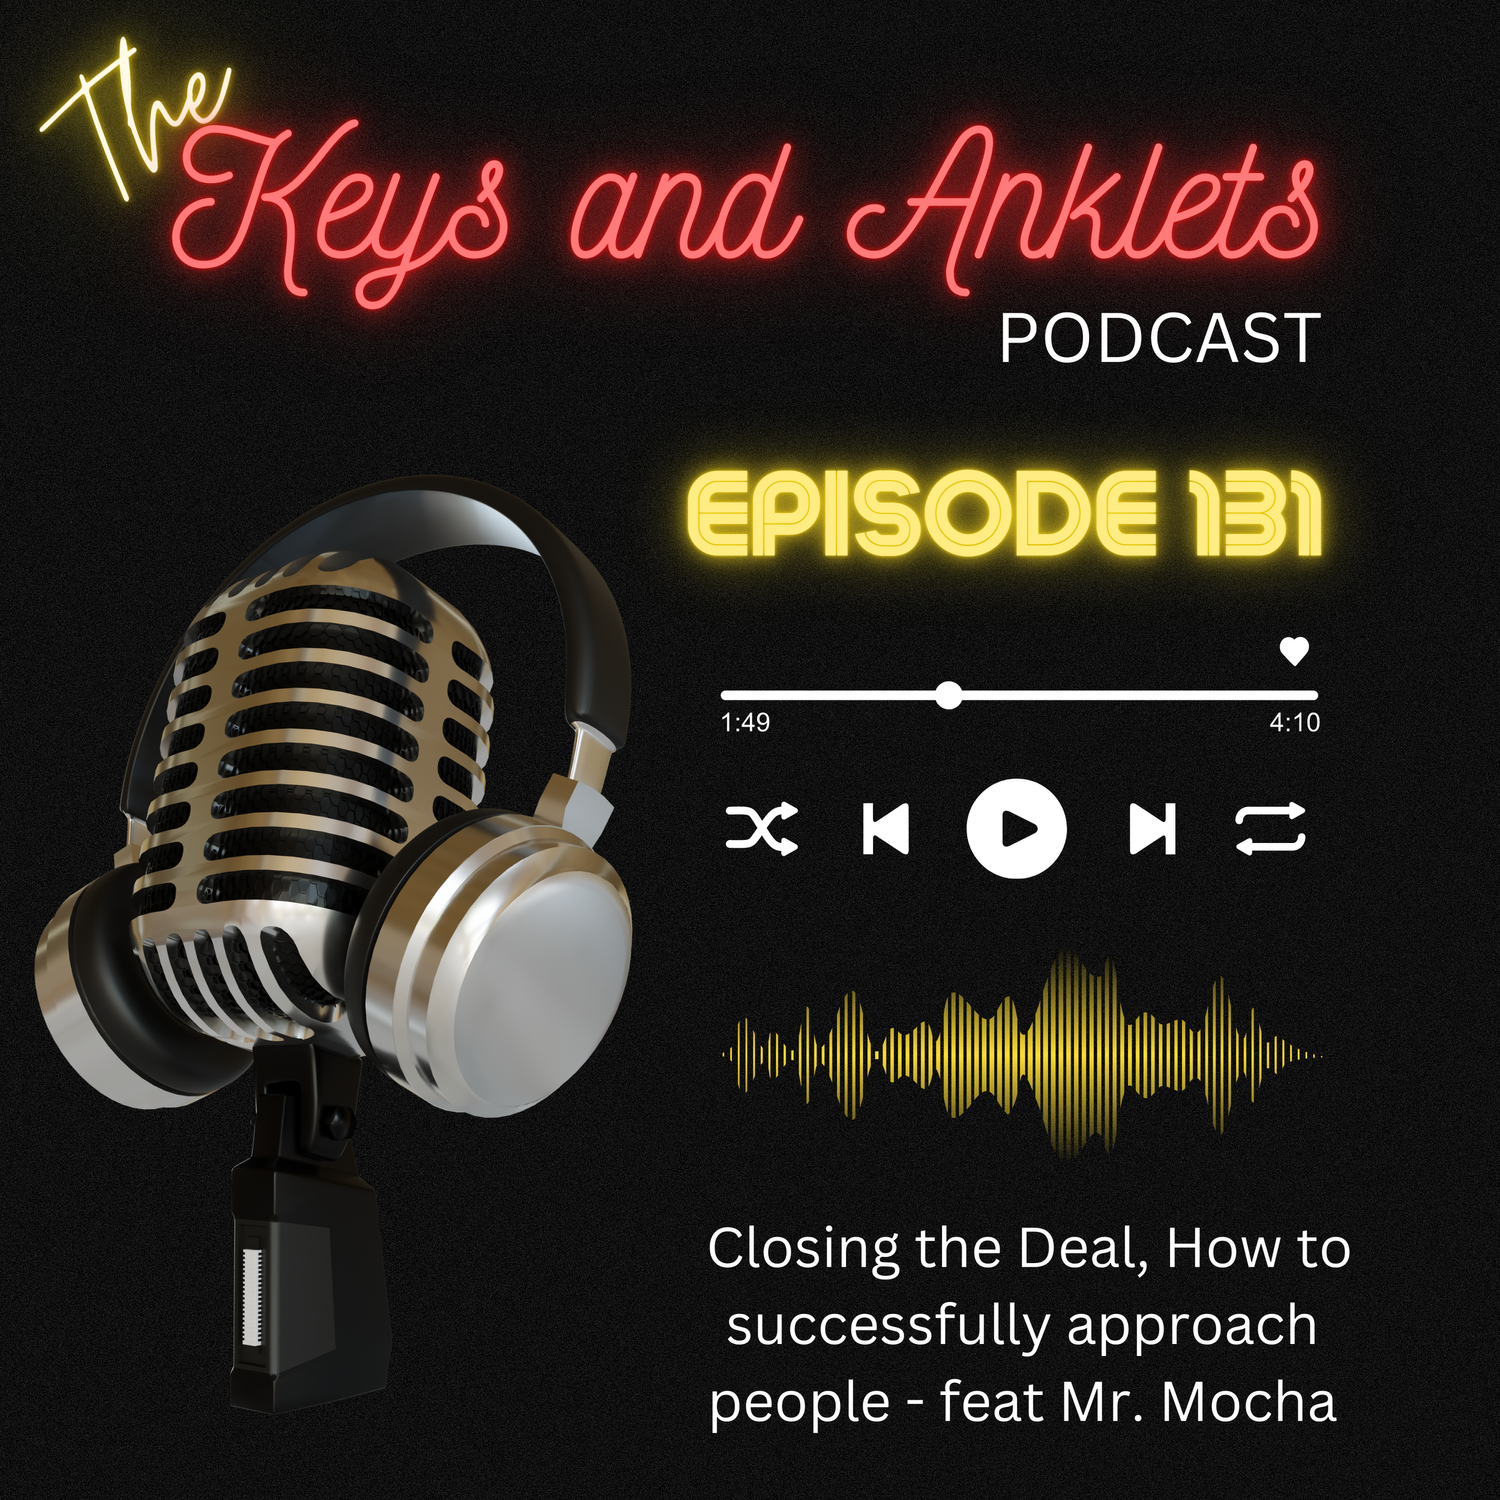 Episode 131 - Invited to Live Chat w/Mr. Mocha - How to “close the deal”